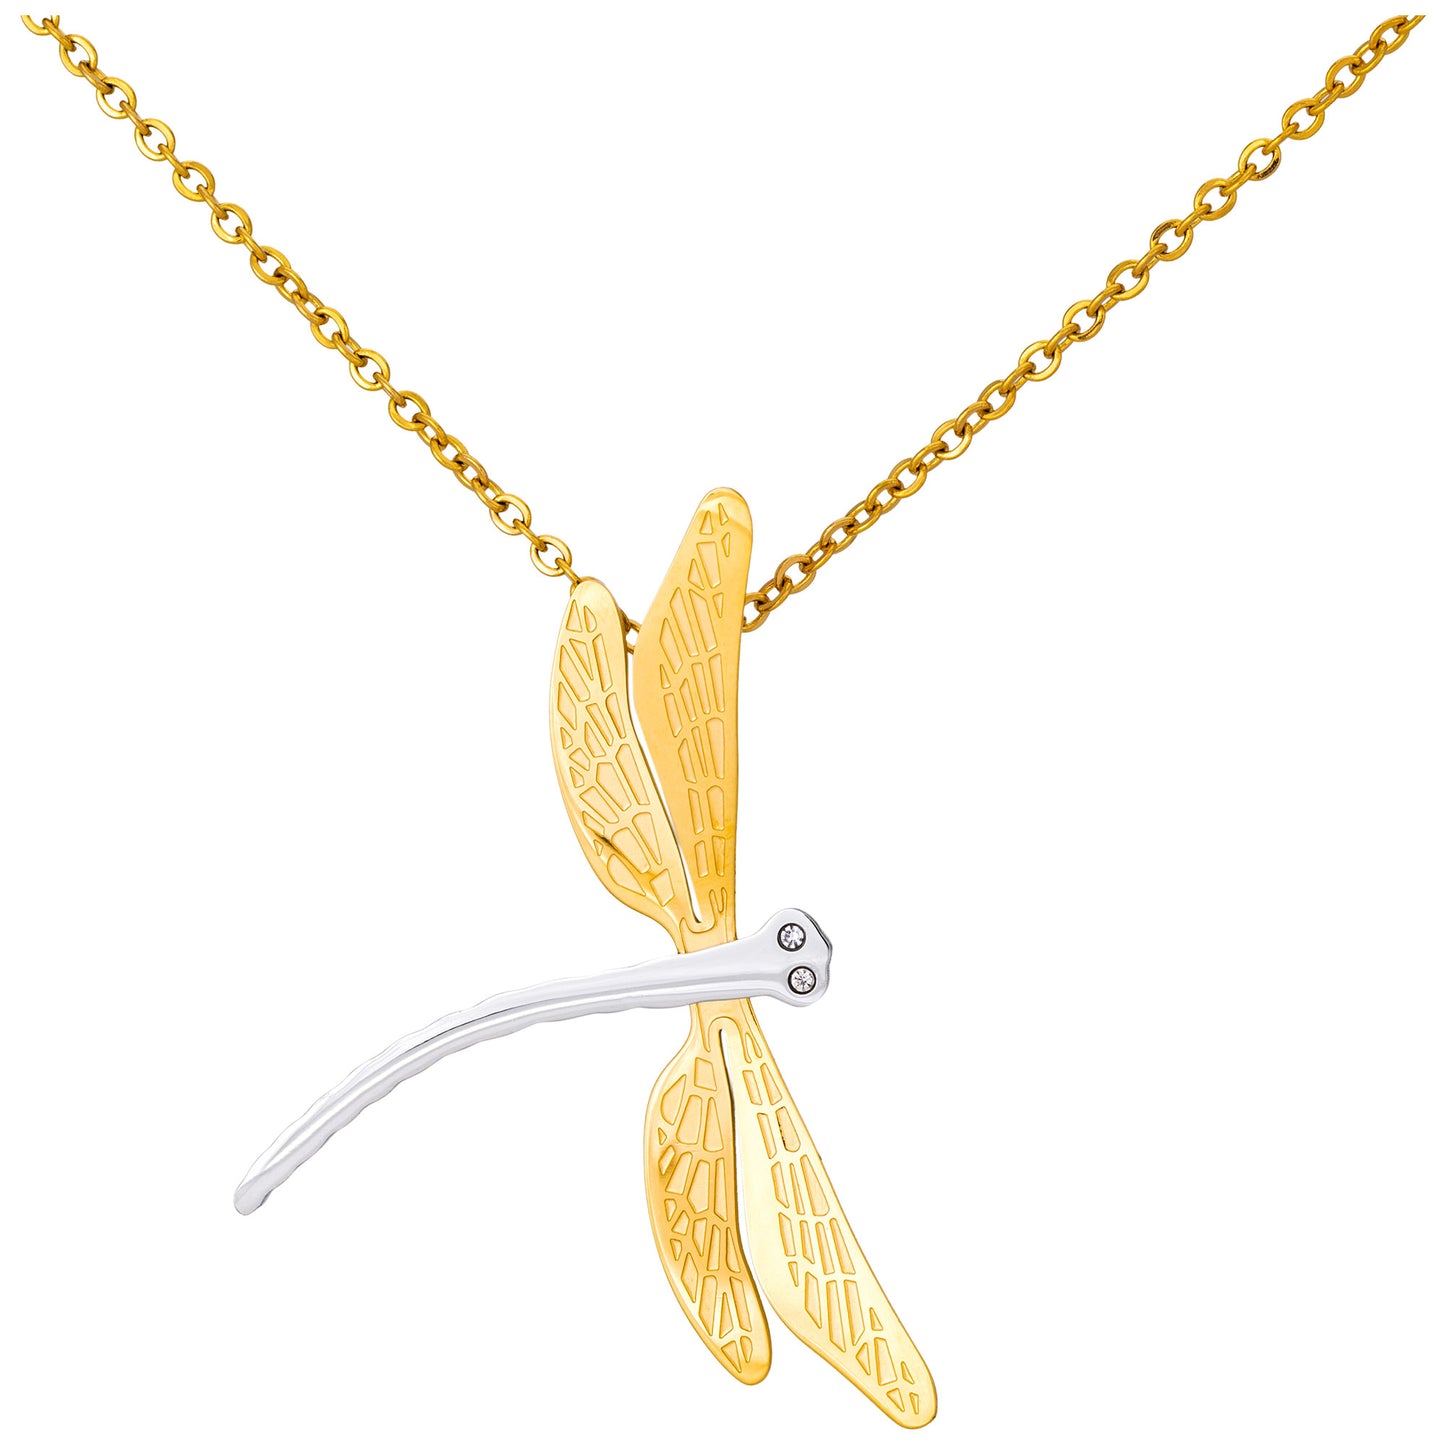 Three-Dimensional Dragonfly Necklace